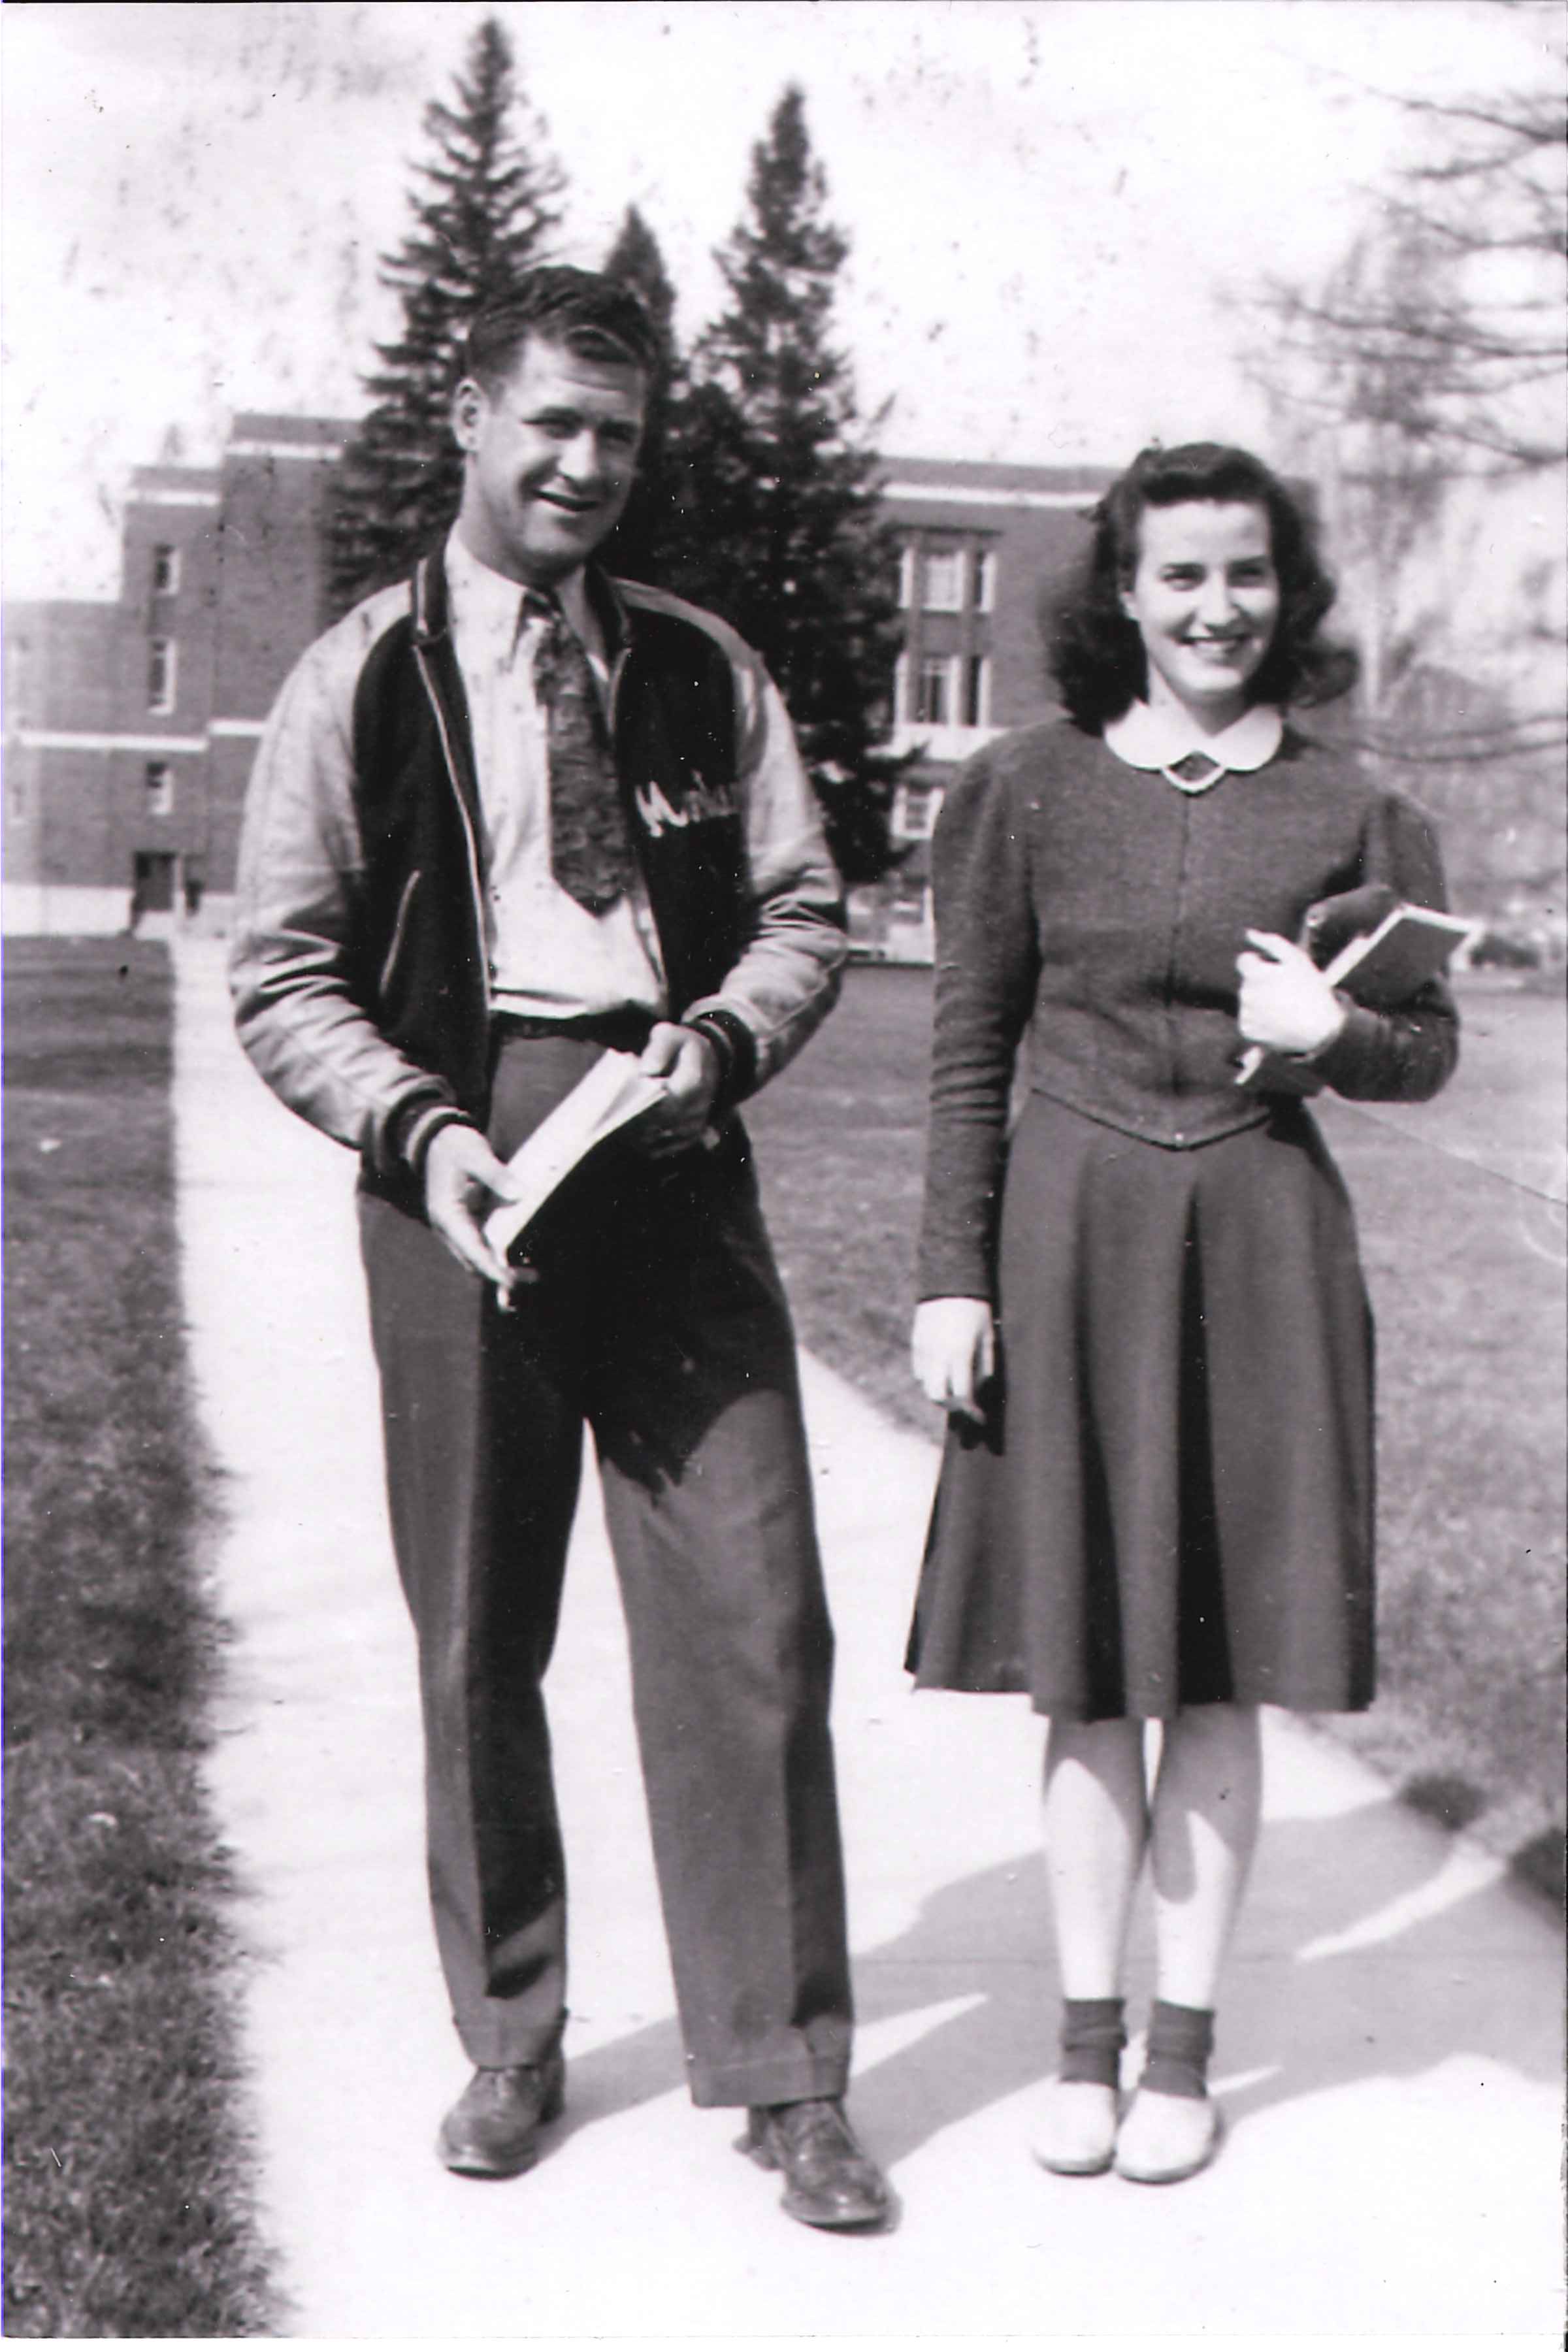 Tom O'Donnell and Barbara Adams met on UM's campus in the spring of 1940